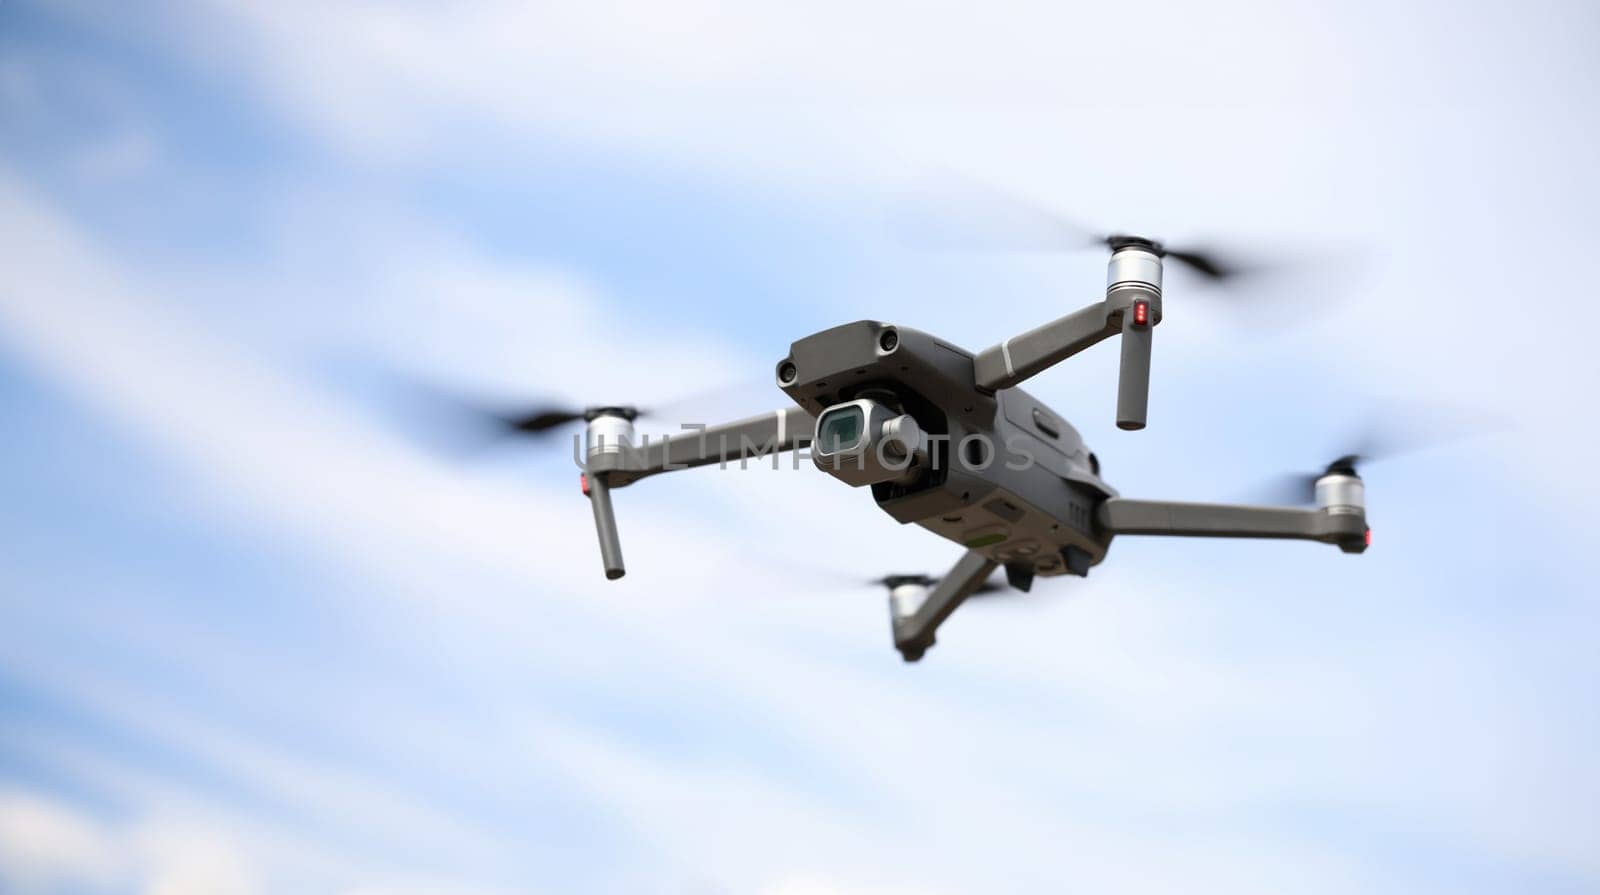 Close-up of digital camera on drone with remote control. Modern copter flying in sky. Shooting propeller option. Technology and innovation concept